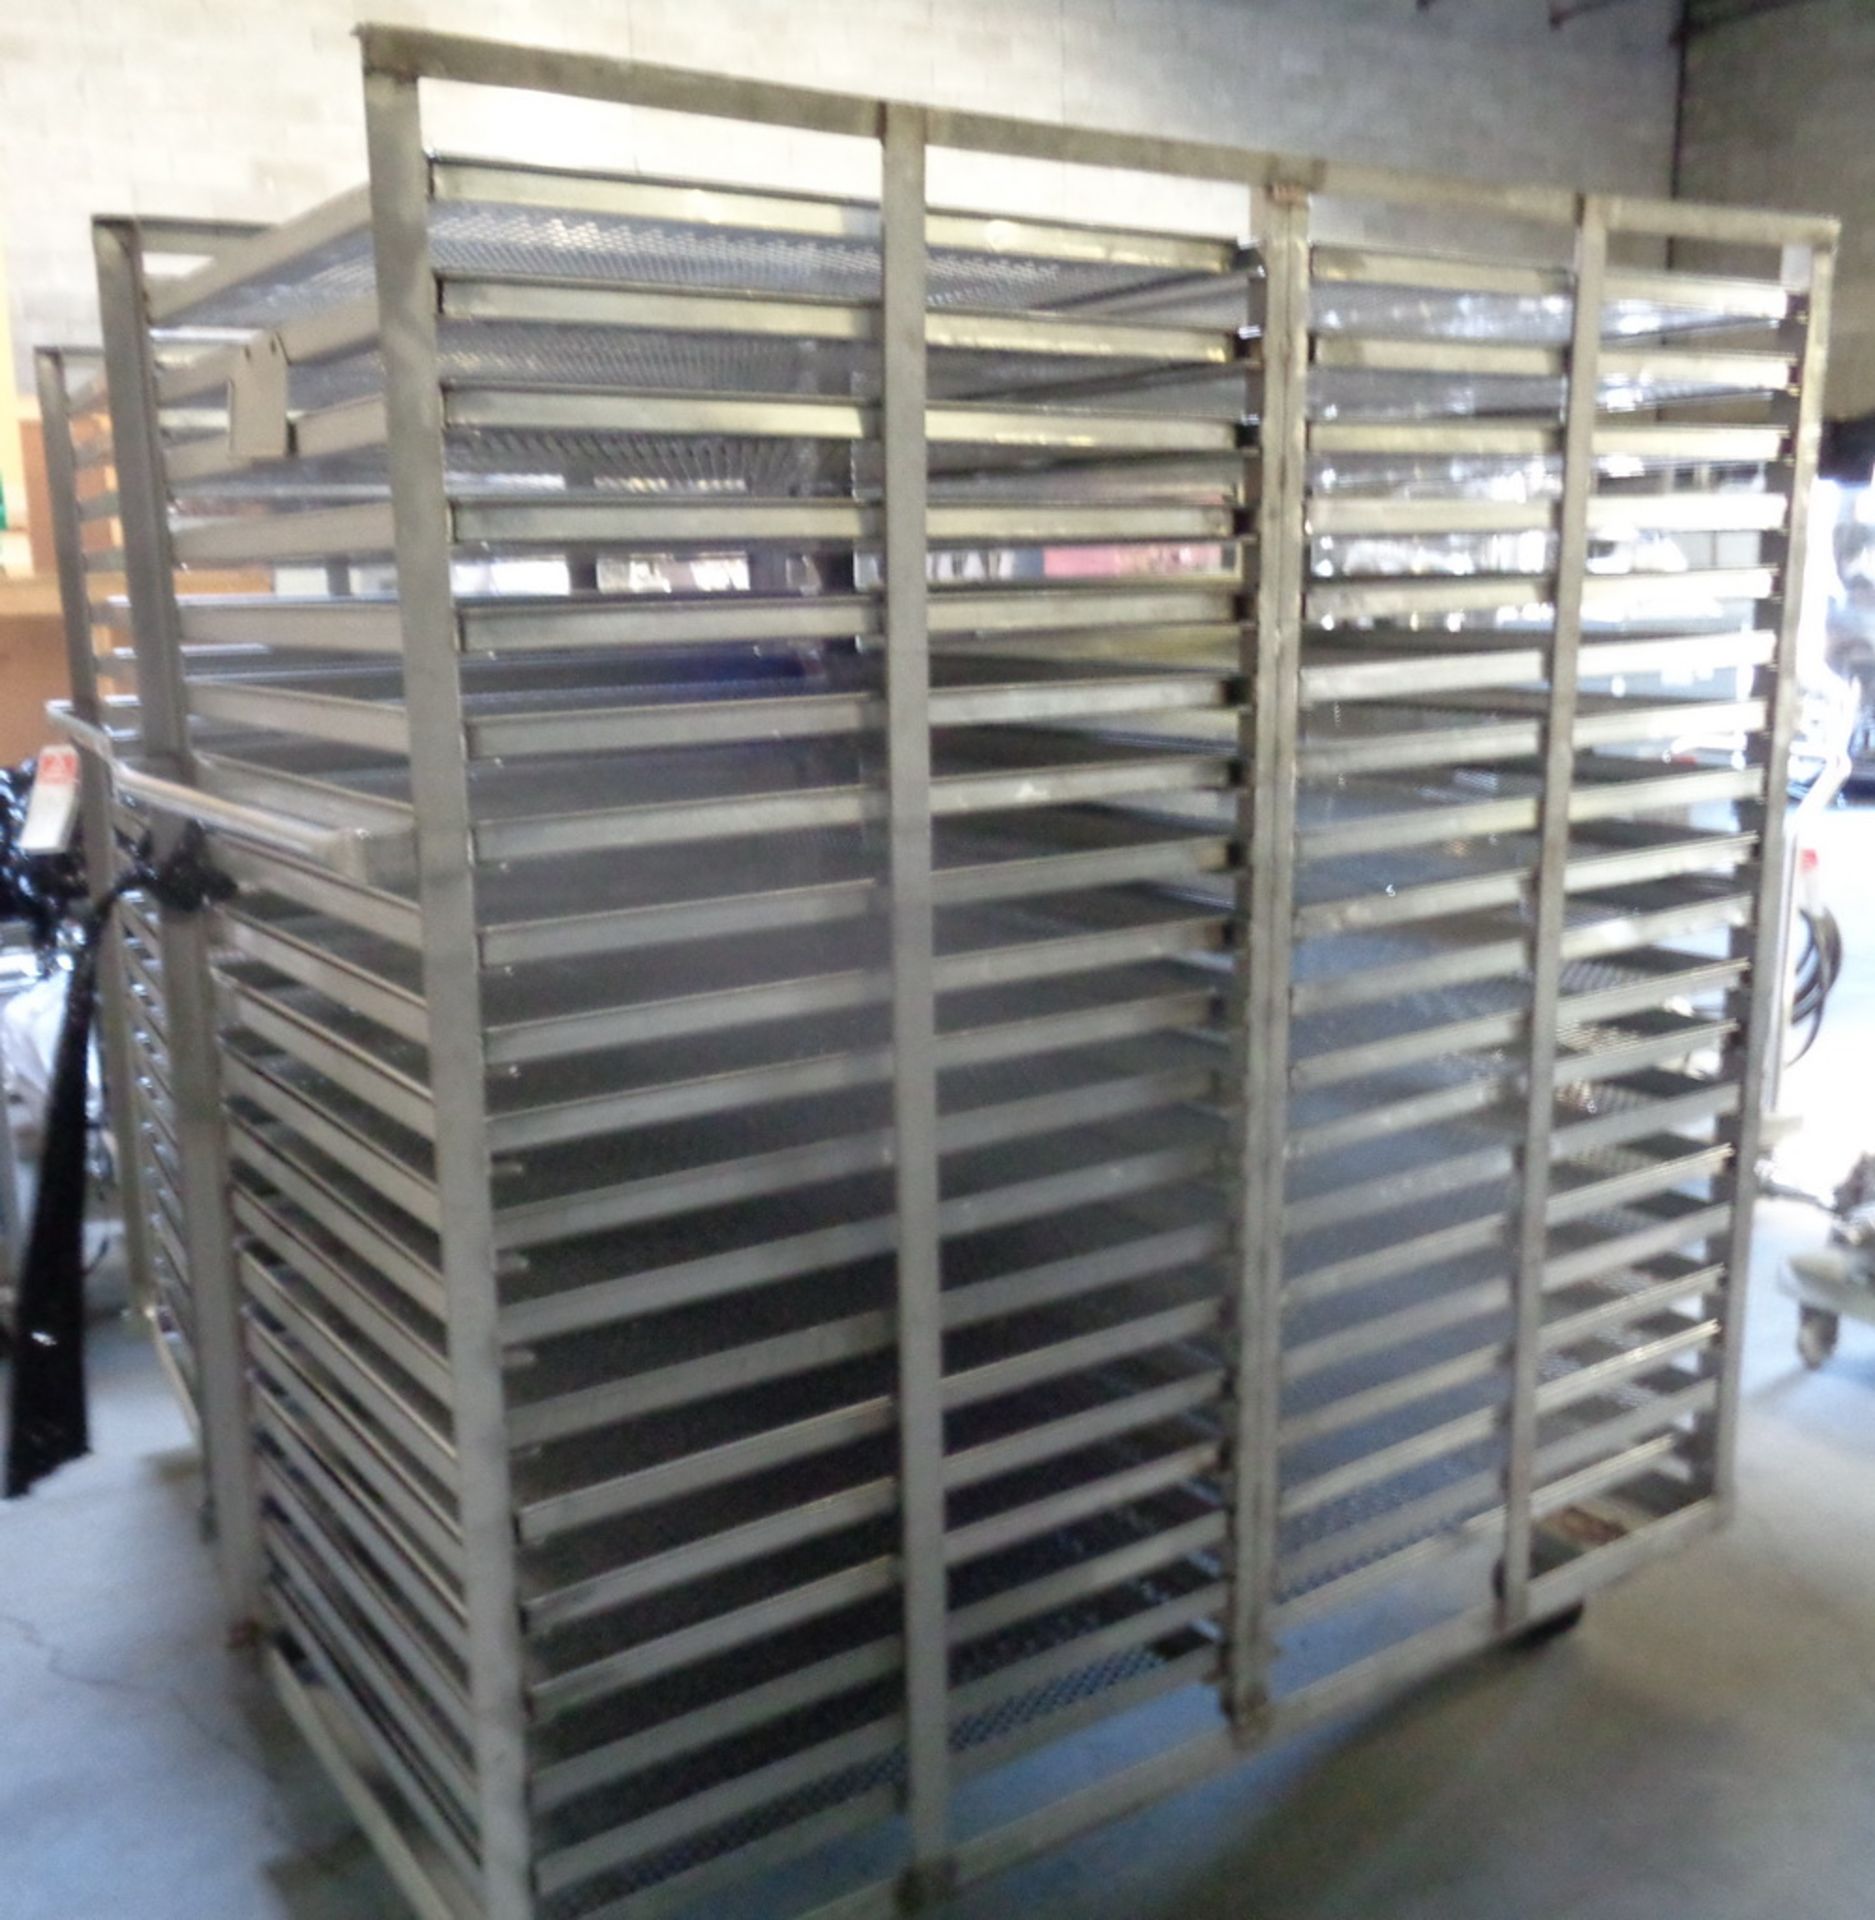 Stainless Steel Oven Rack, portable (for drying oven), includes 19 SS trays - Image 2 of 4